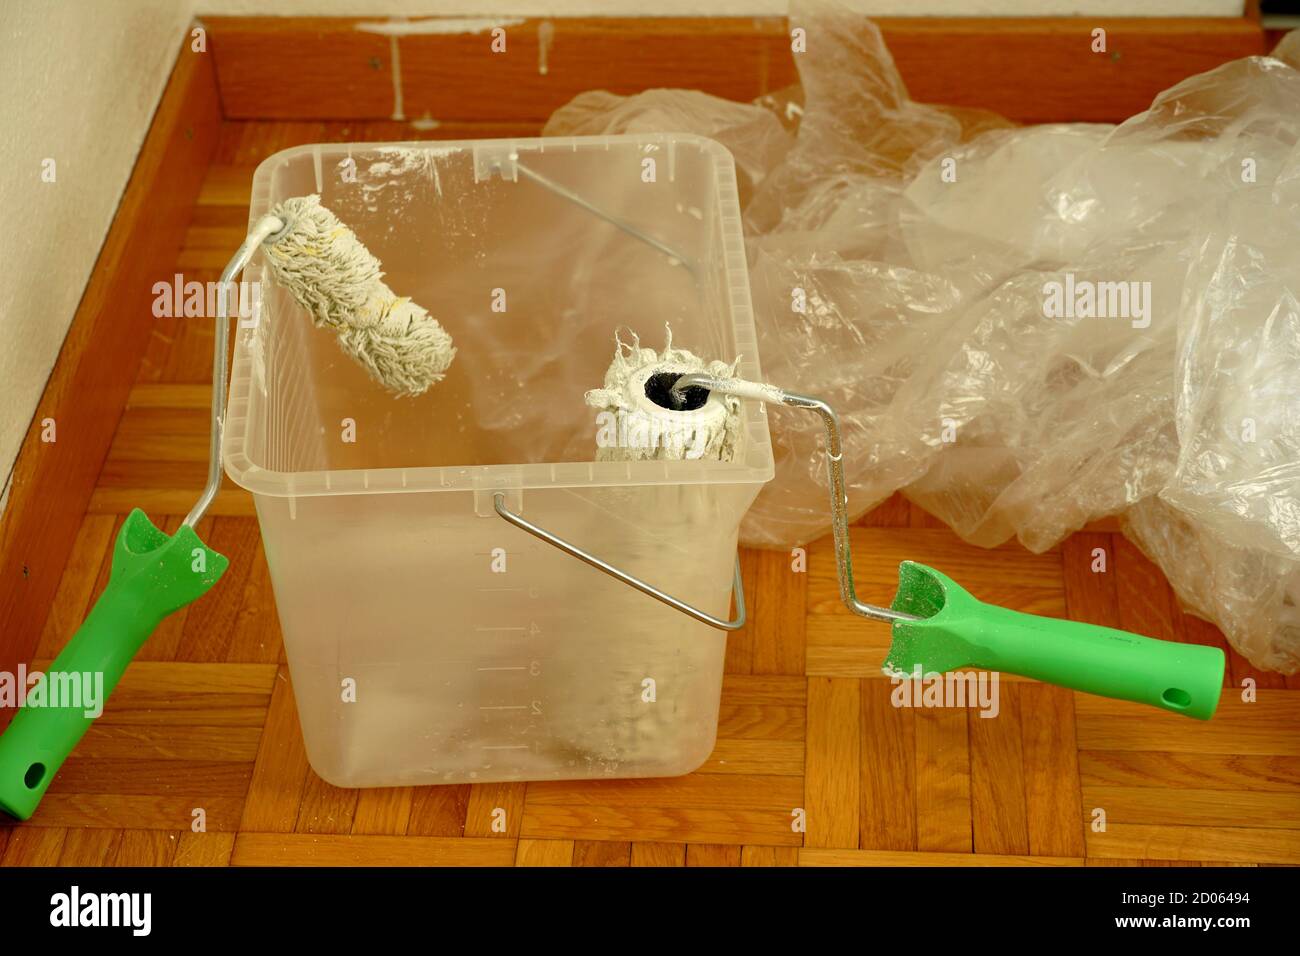 Two paint rollers in a container on the floor. The paint is dripping off the rollers. In background there is a plastic foil to protect the furniture. Stock Photo